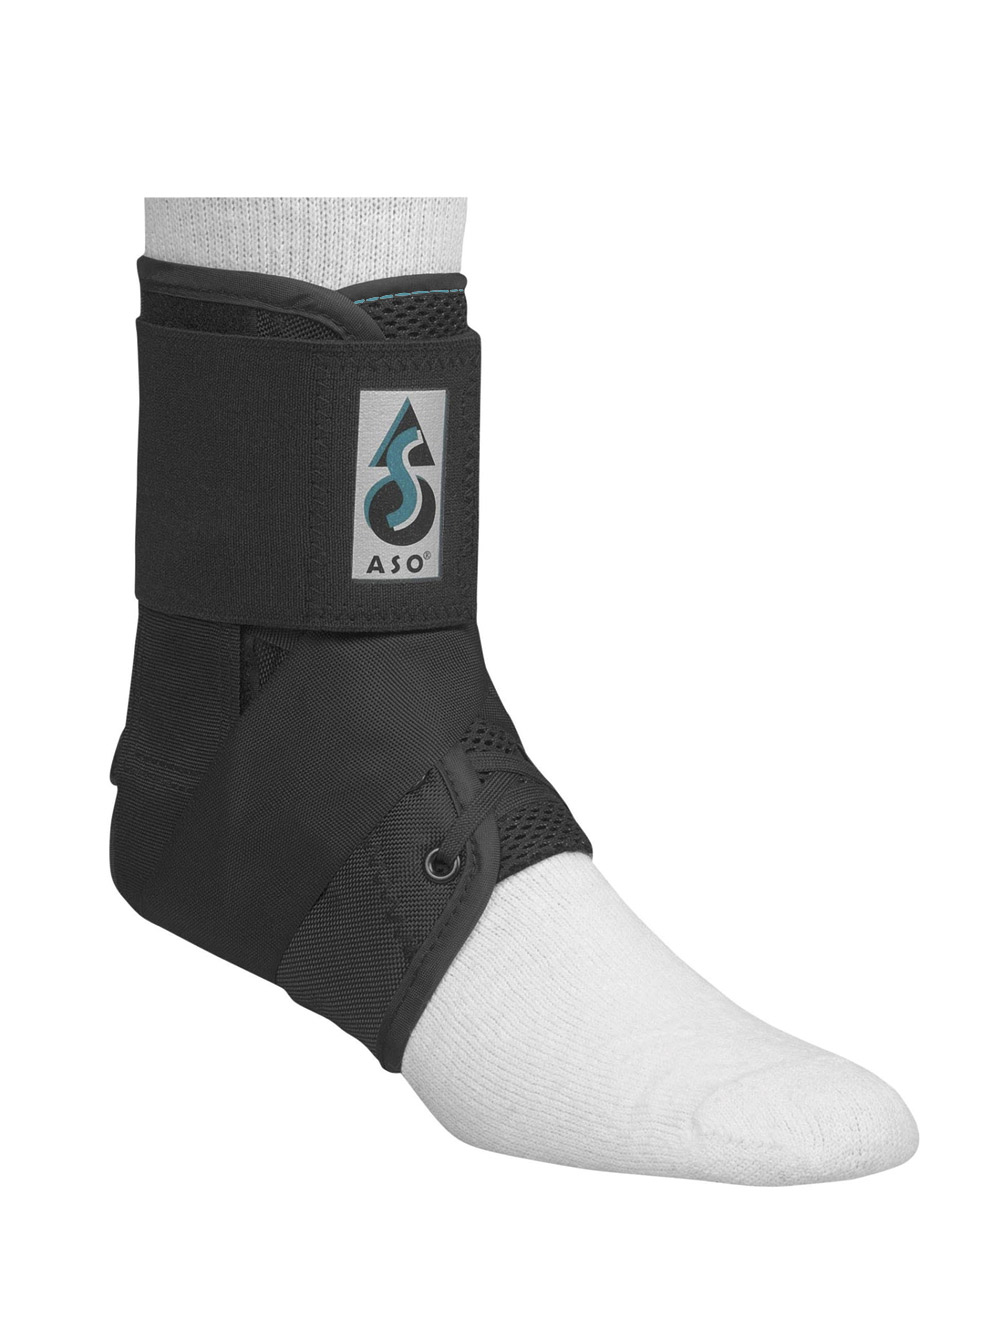 ASO SpeedLacer Ankle Brace | Midwest Volleyball Warehouse